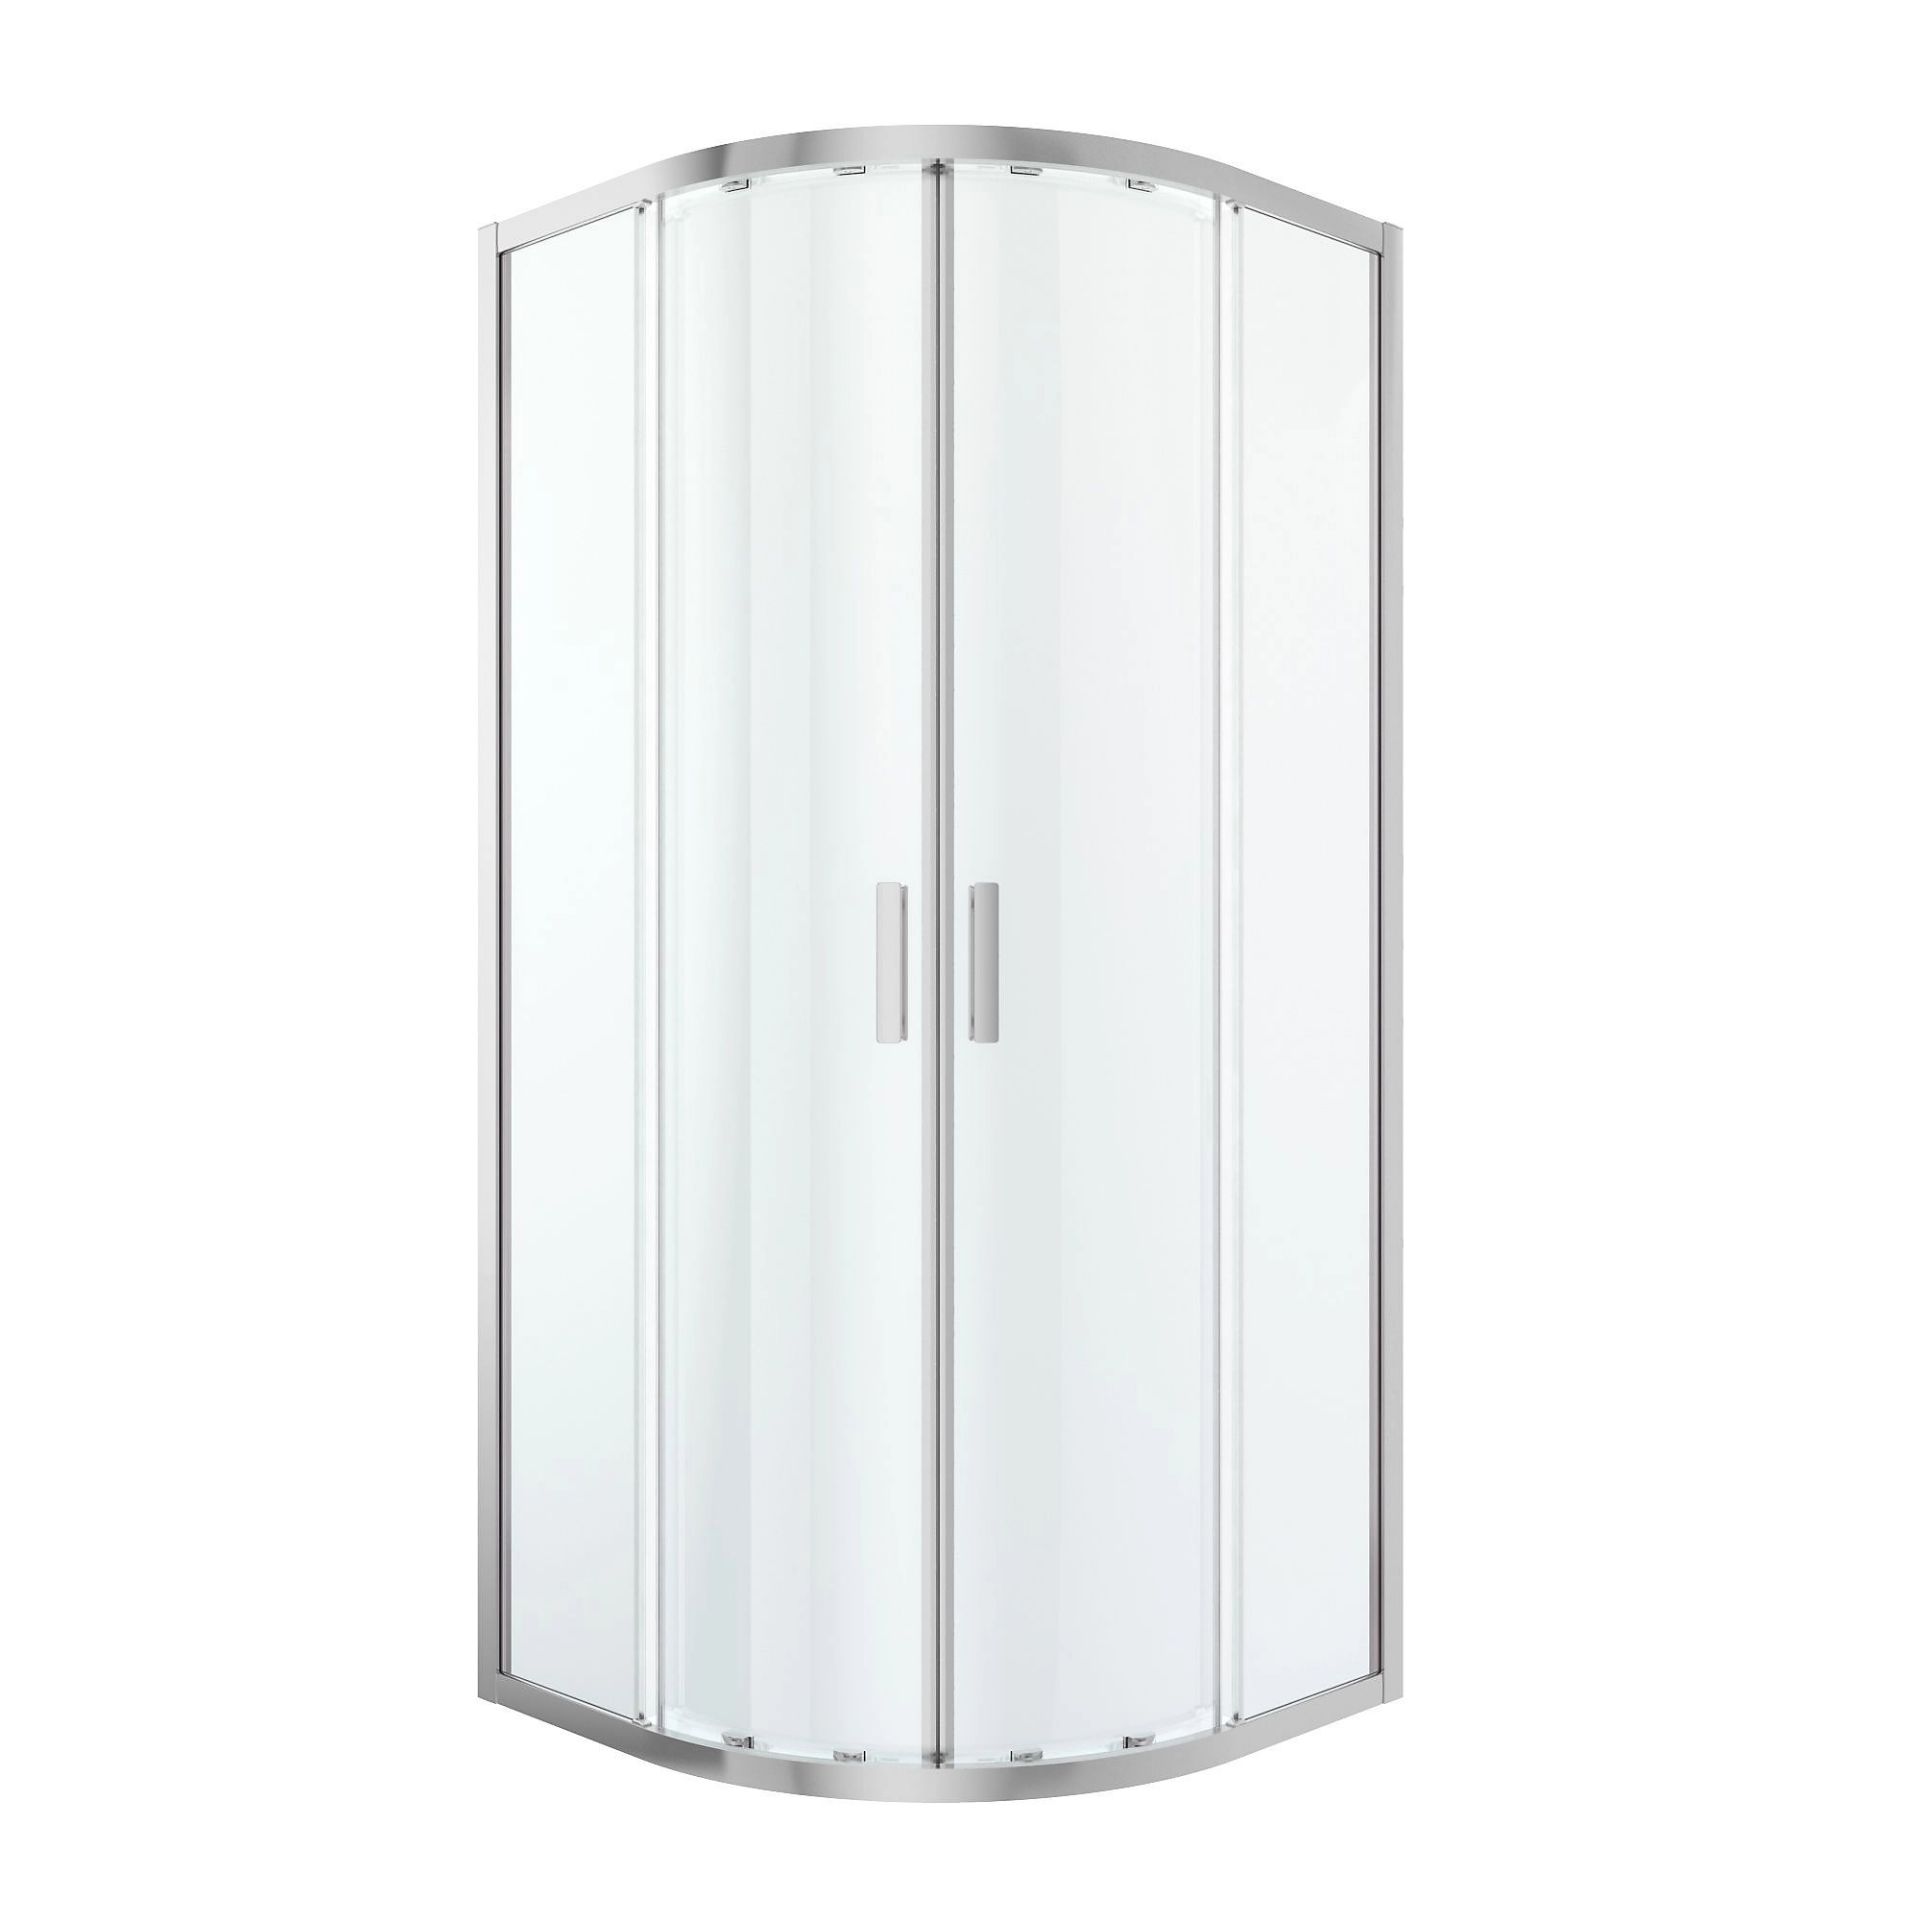 BRAND NEW GOODHOME BELOYA FRAMED CLEAR SILVER EFFECT SQUARE SHOWER ENCLOSURE R18-8